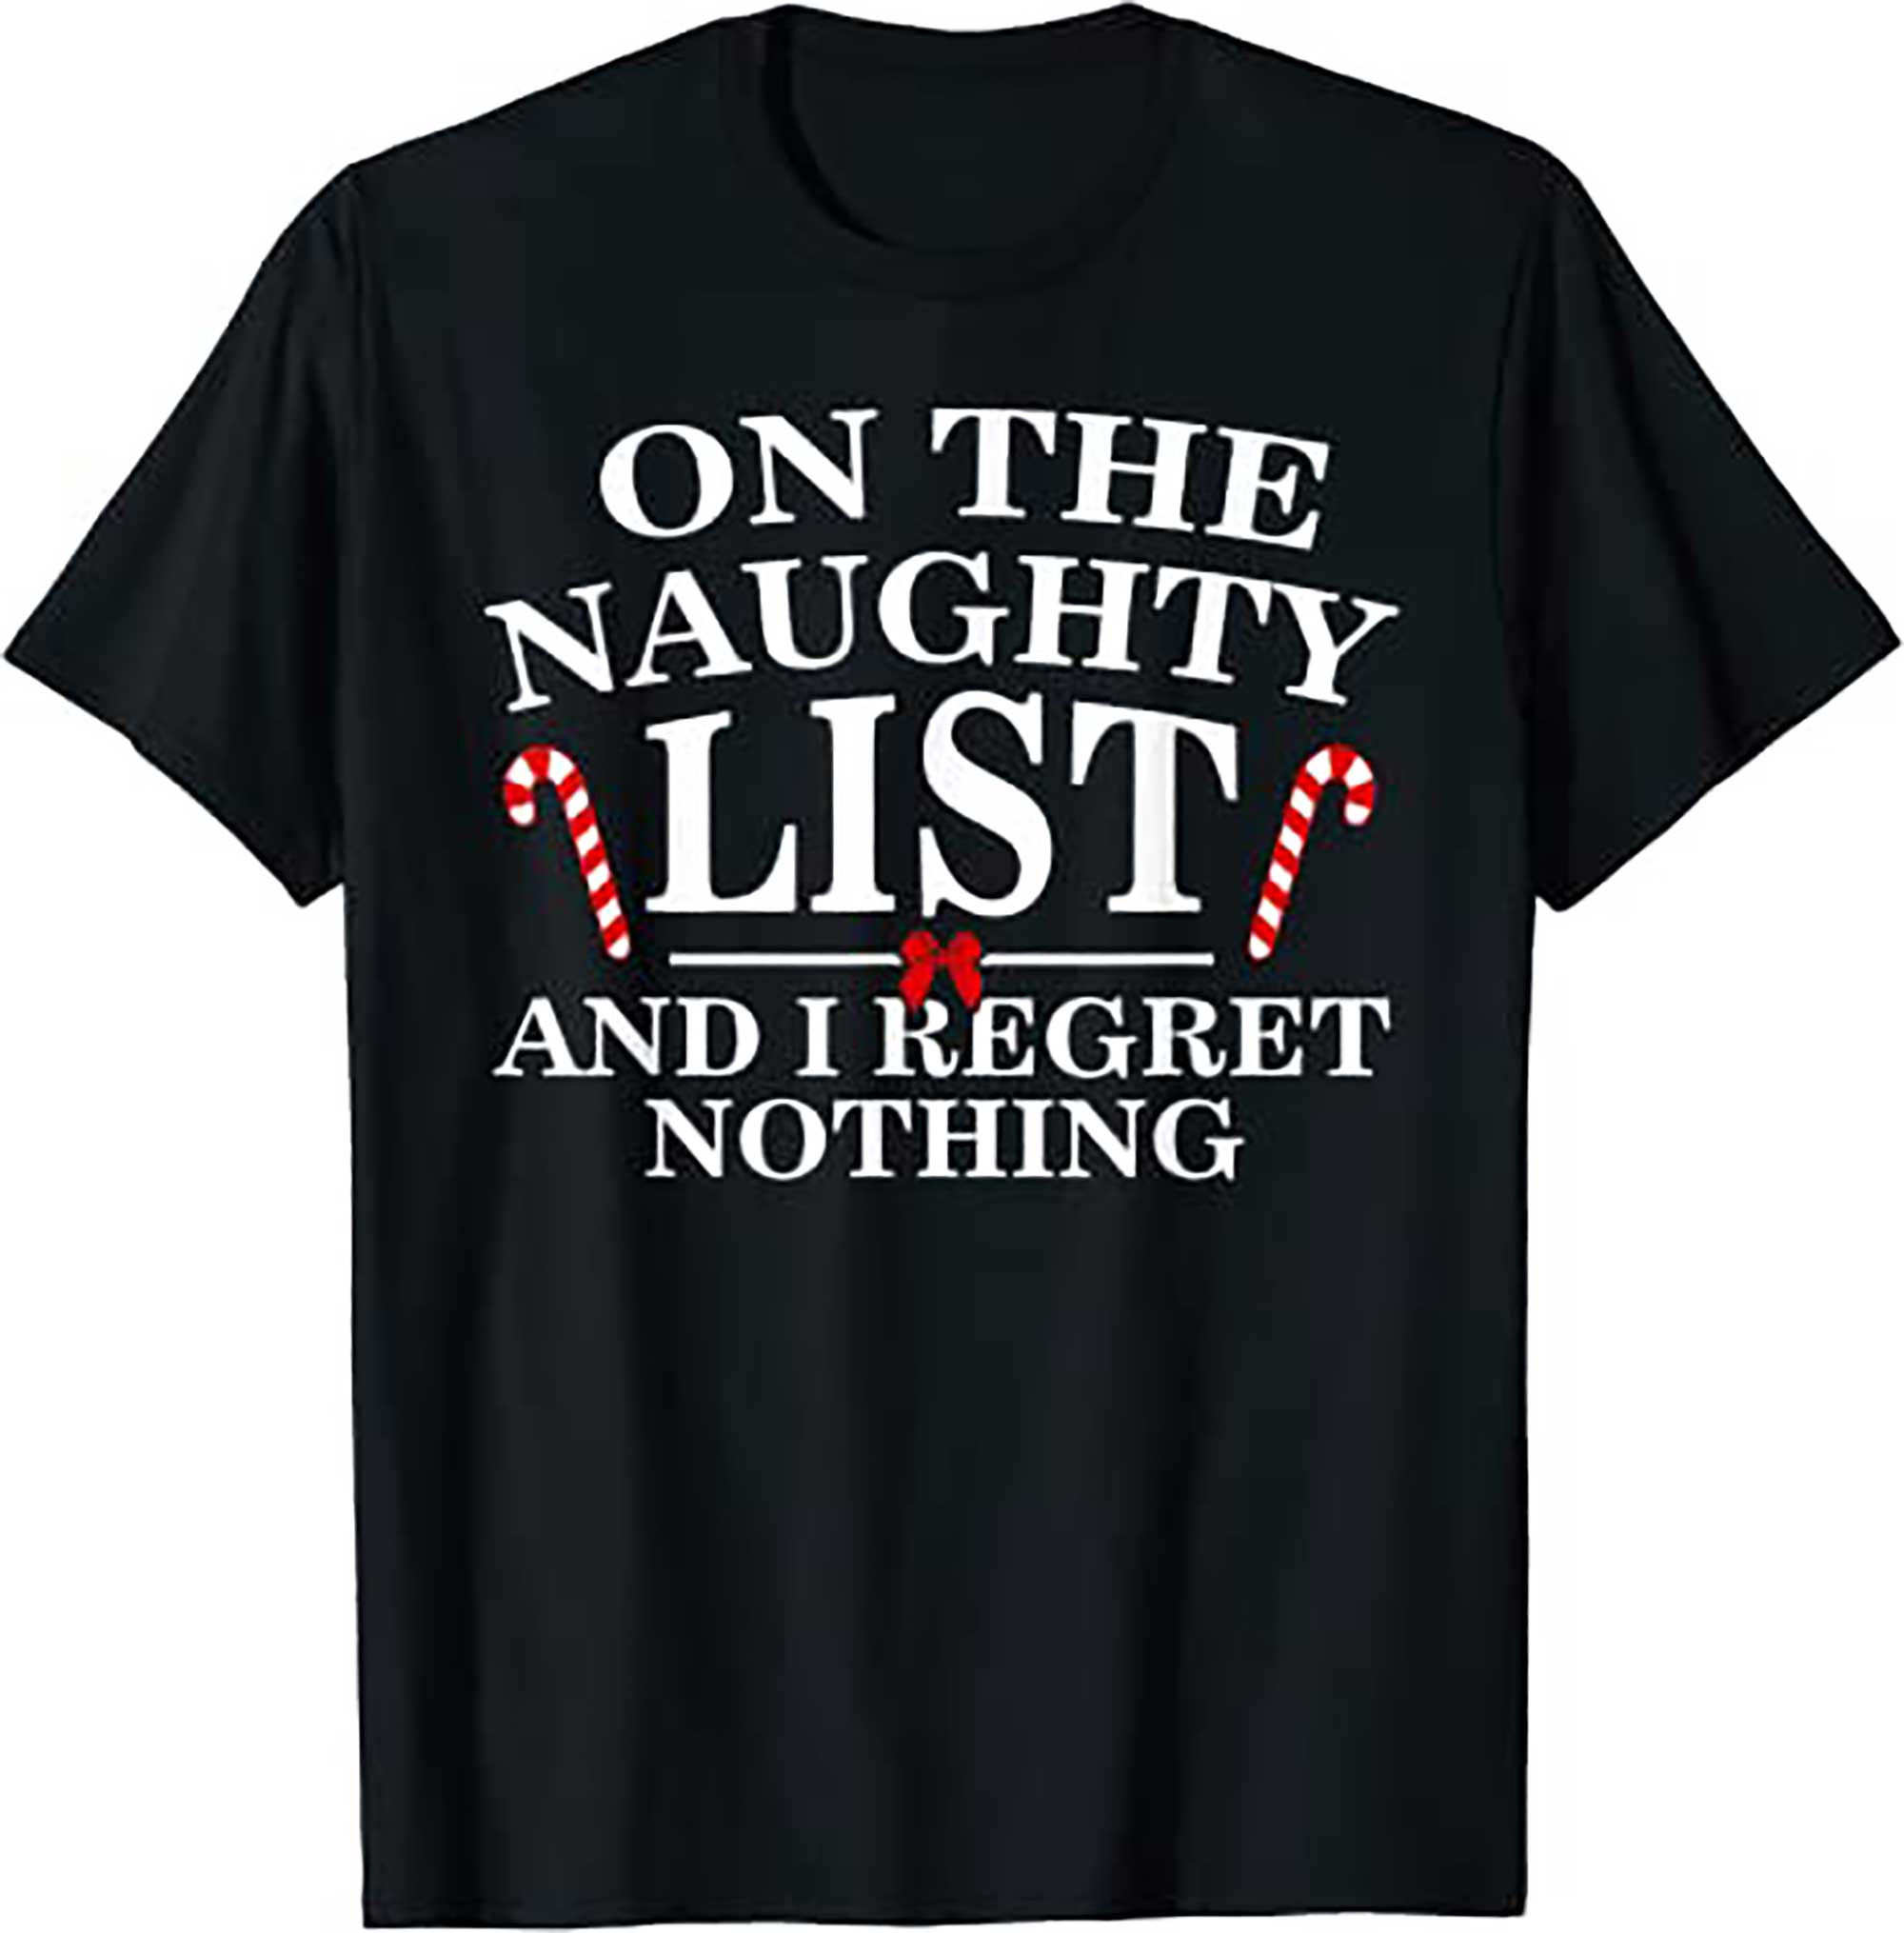 Skitongifts On The Naughty List And I Regret Nothing Funny Xmas Shirt